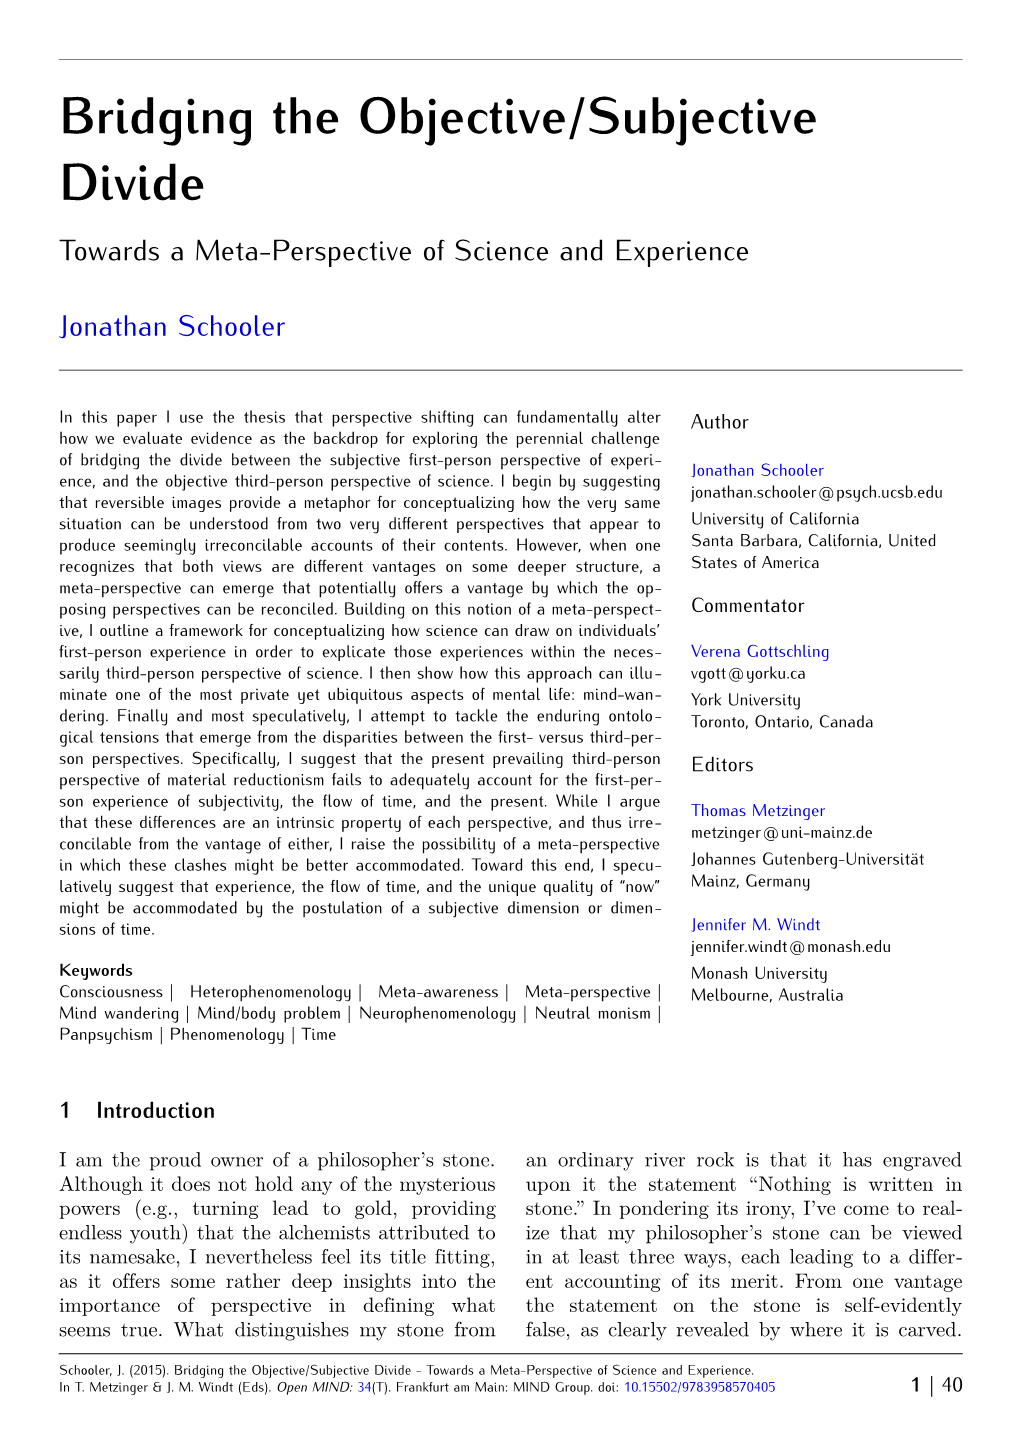 Schooler, J. (2015). Bridging the Objective/Subjective Divide - Towards a Meta-Perspective of Science and Experience